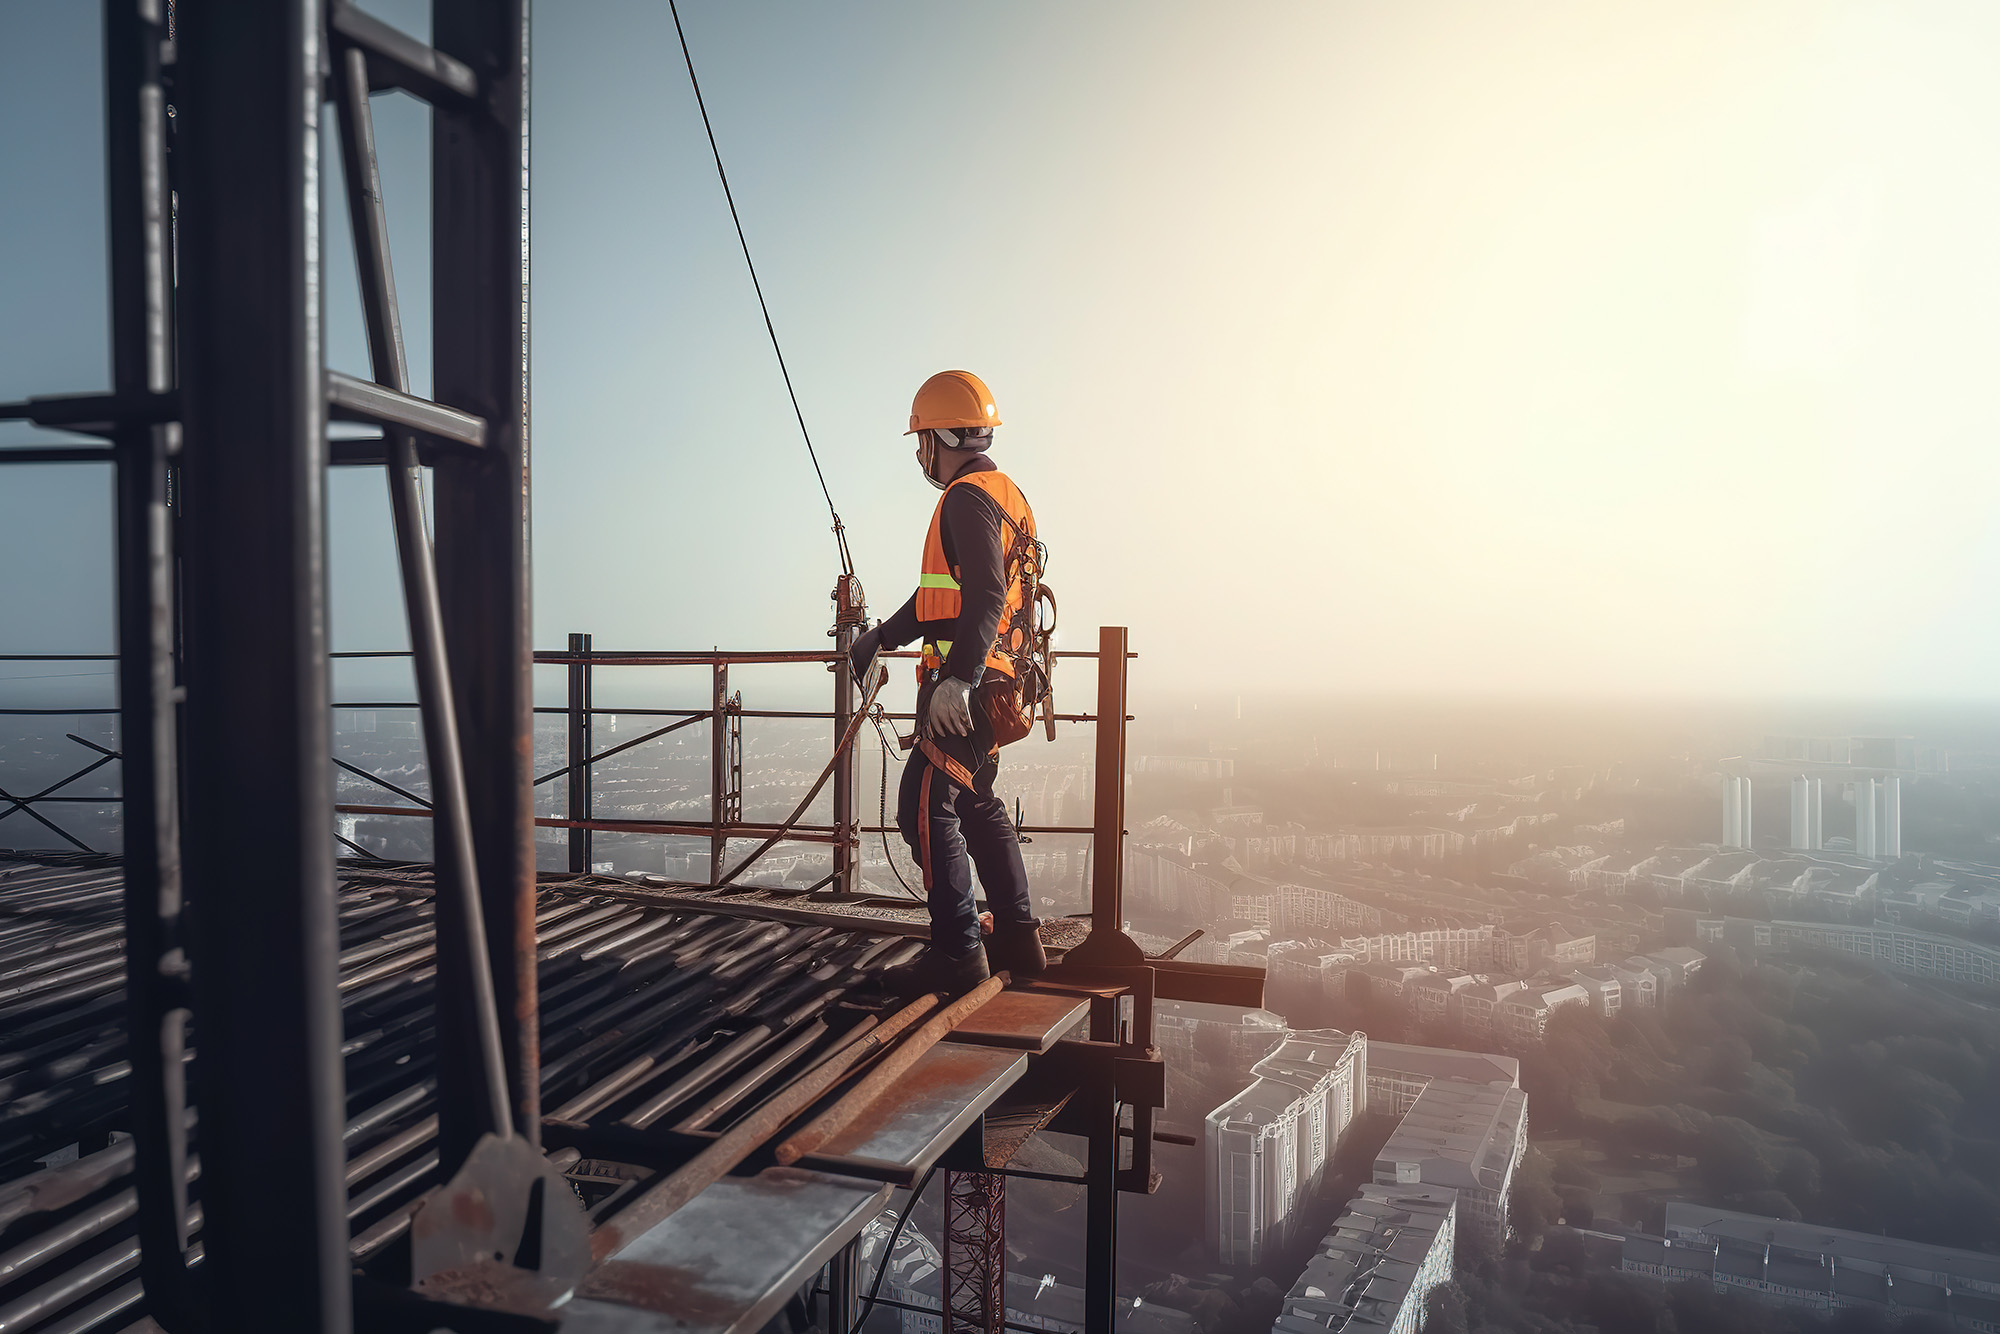 Safety Matters: Fall Protection and Safety: A construction worker using proper fall protection gear.